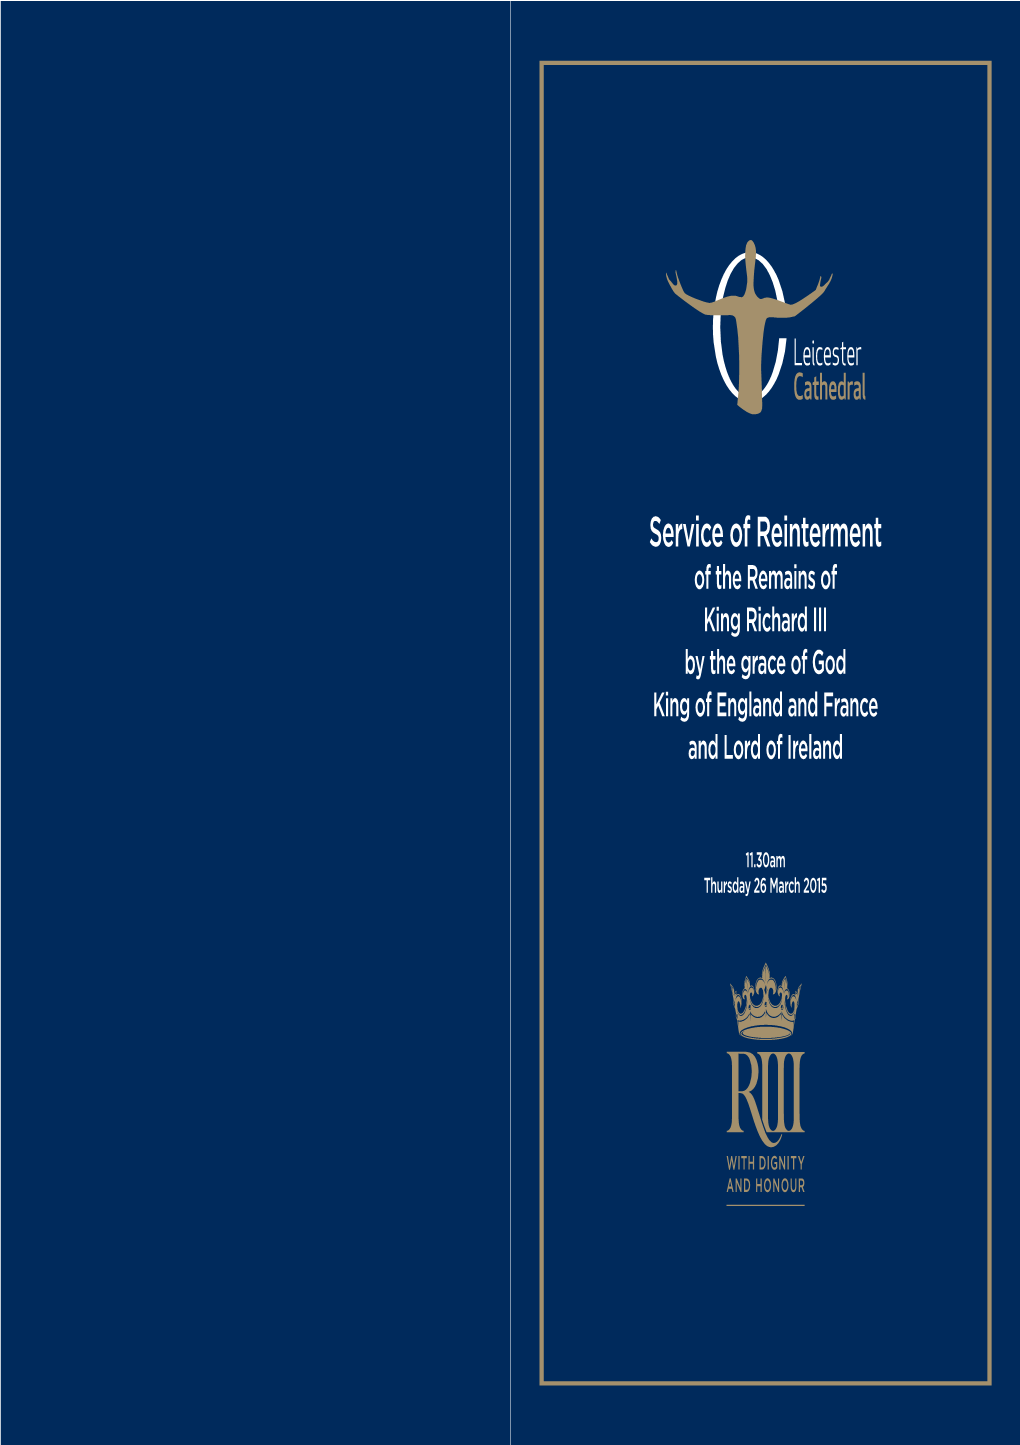 Service of Reinterment of the Remains of King Richard III by the Grace of God King of England and France and Lord of Ireland